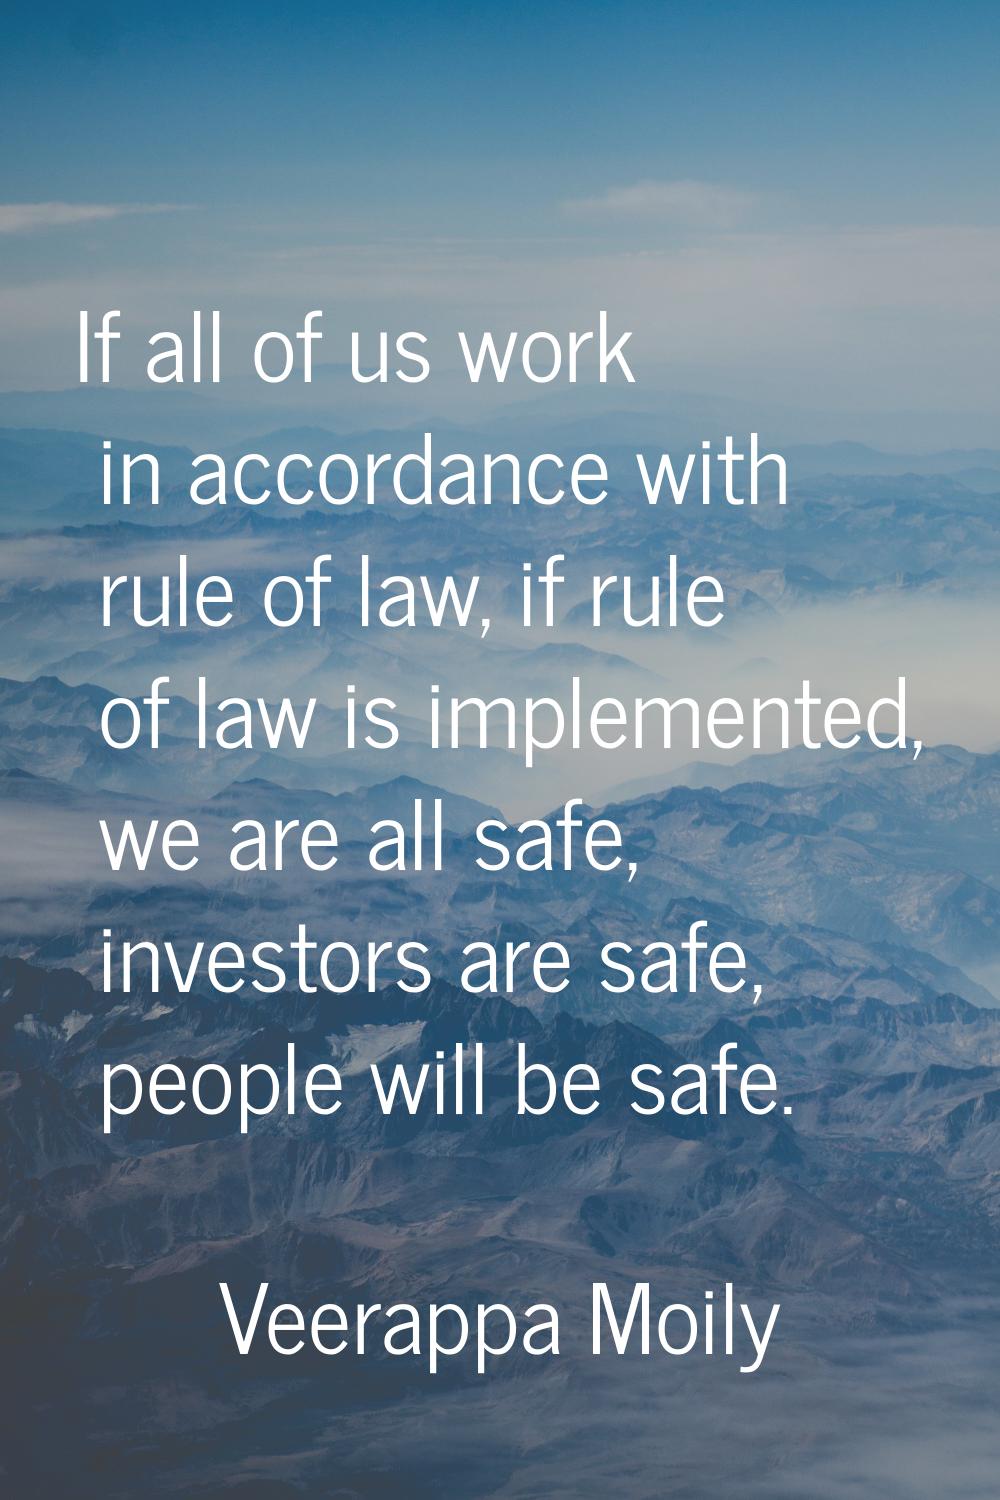 If all of us work in accordance with rule of law, if rule of law is implemented, we are all safe, i